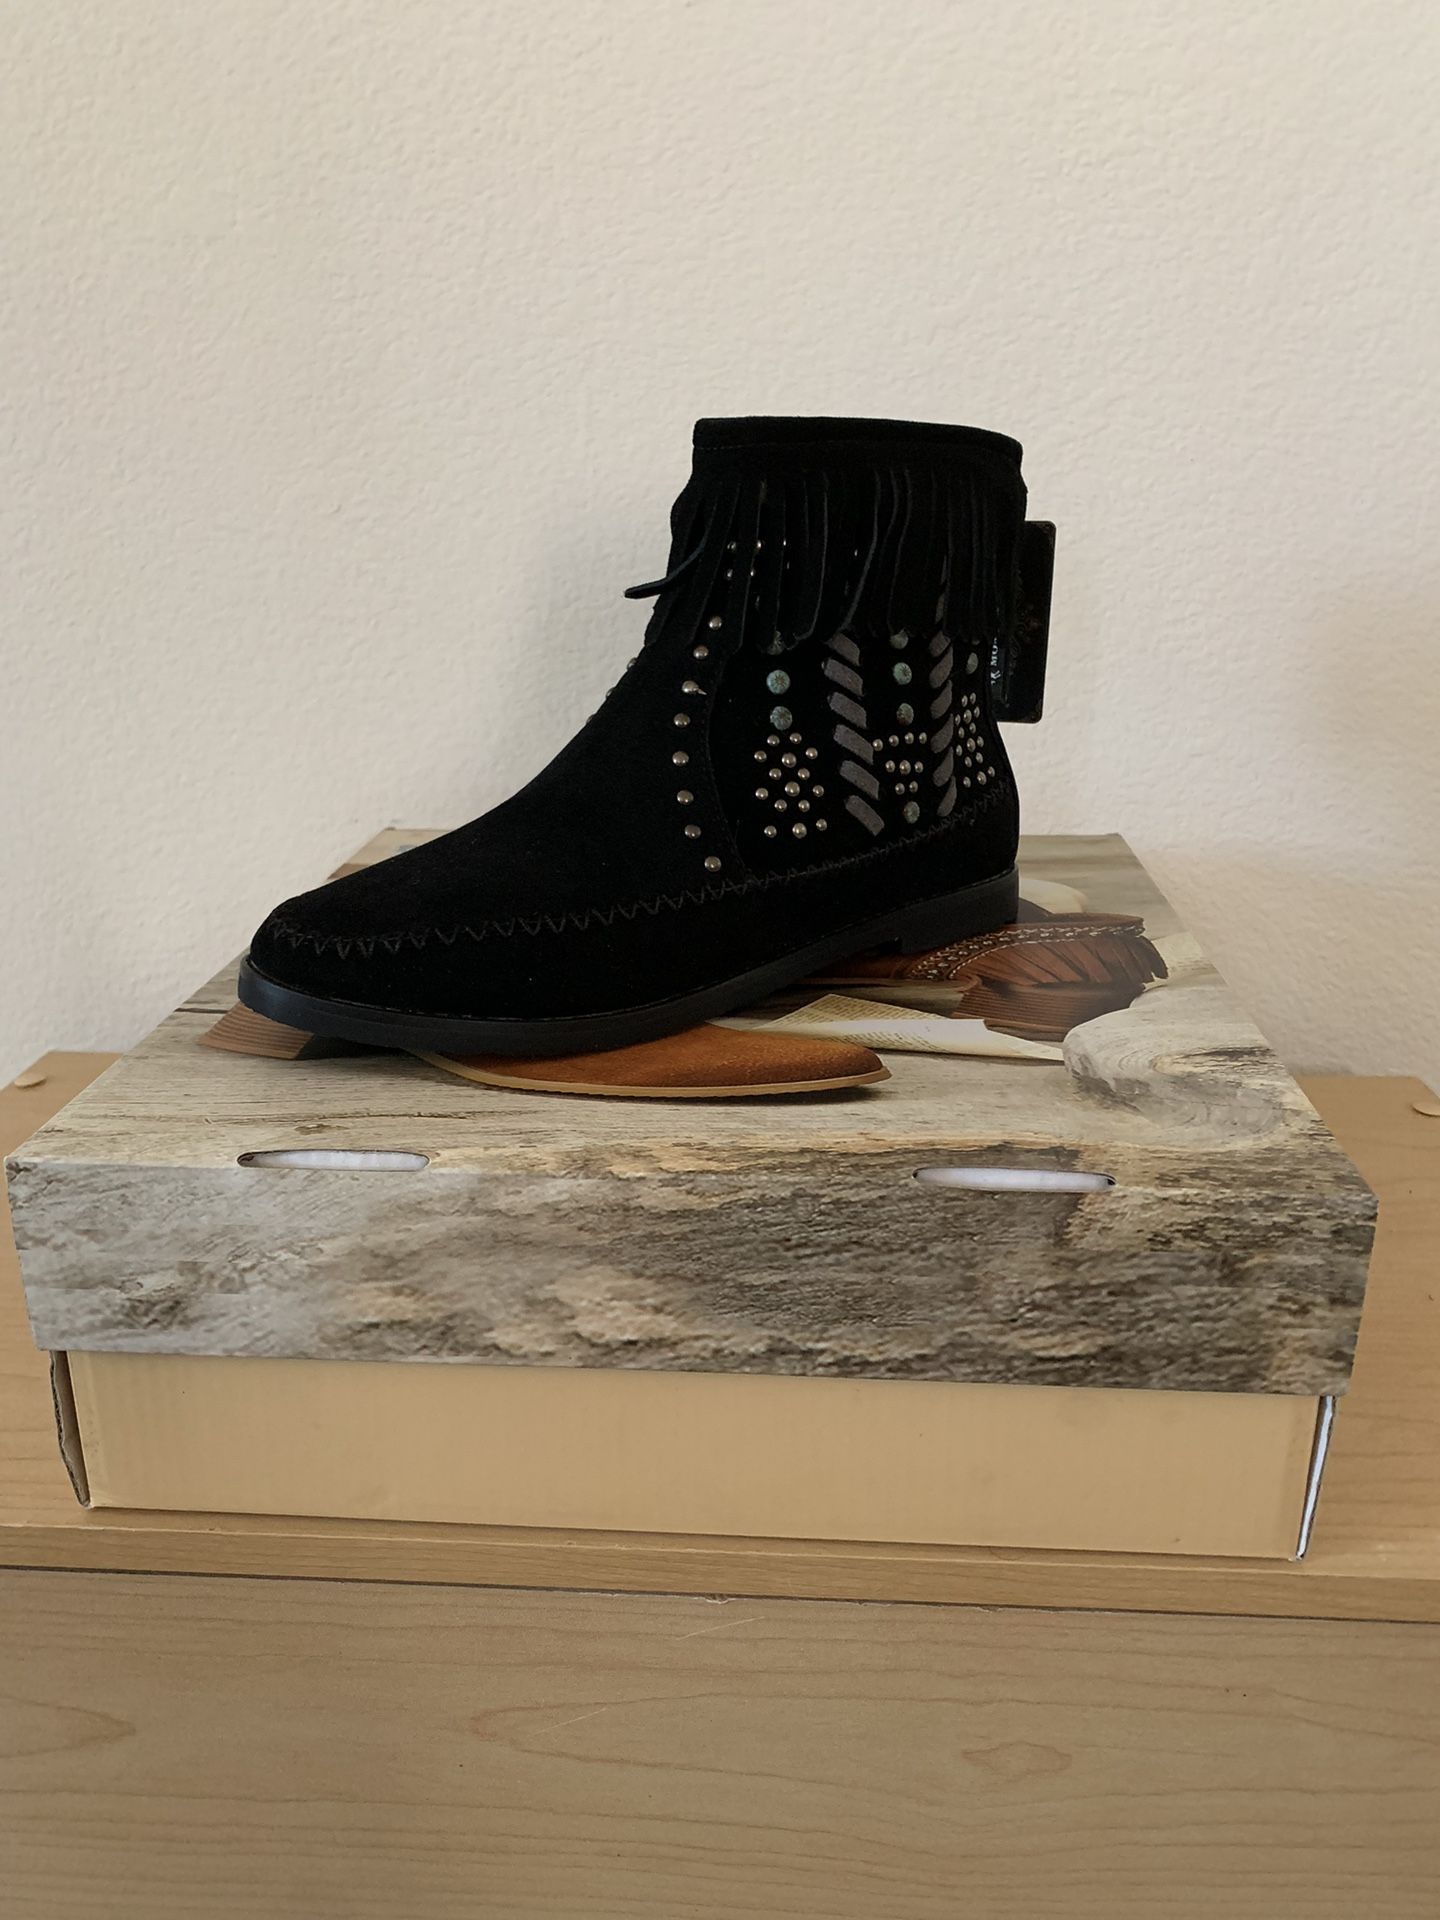 Brand New Black Southwest Boots Size 9 - Fits like a size 8 or 7.5